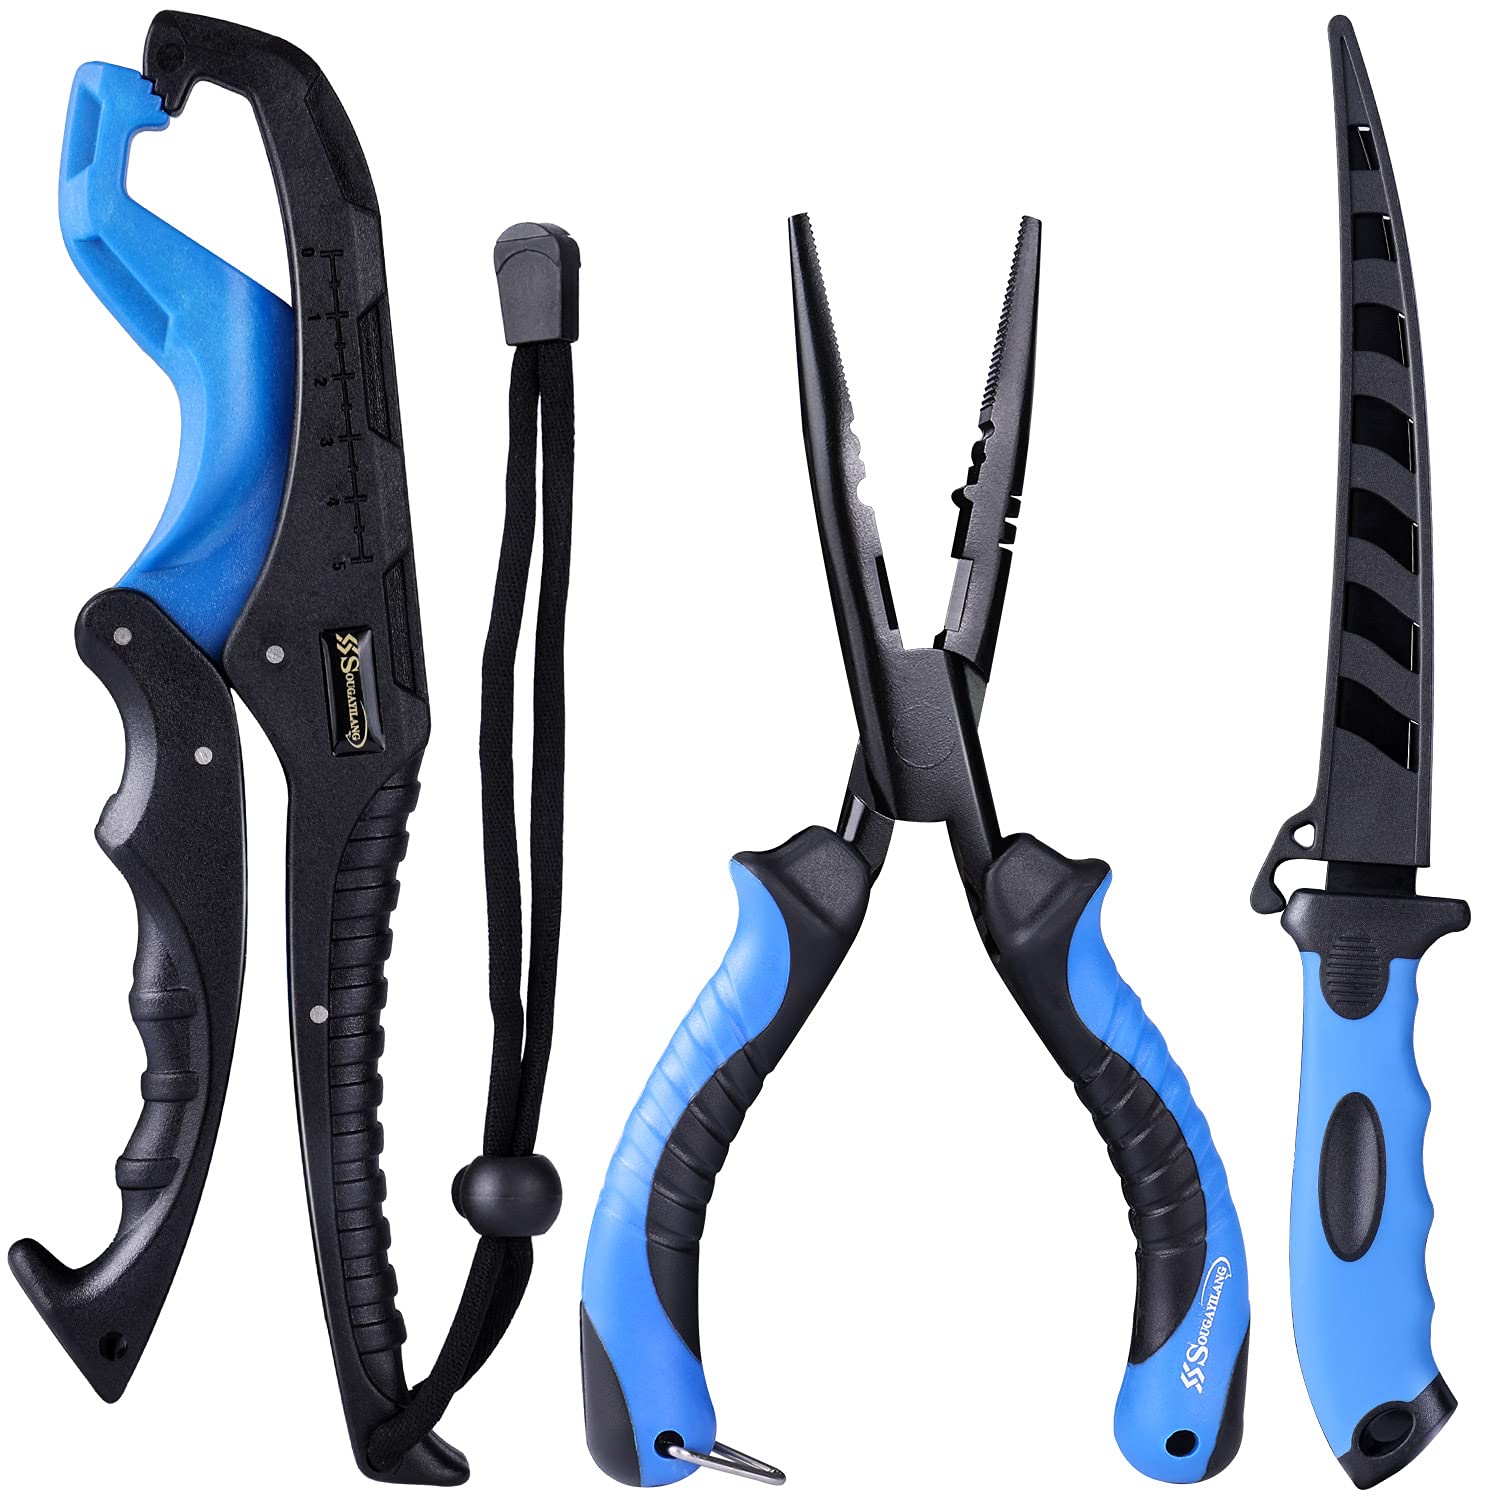 Sougayilang Fishing Pliers 4pcs Tools Set Combos with Steel Pliers,Floating  Lip Grip,Sharp Fillet Fishing Knife,Multi-Function Fishing Tools,Fishing  Gear with Gift Box Fishing Pliers Set